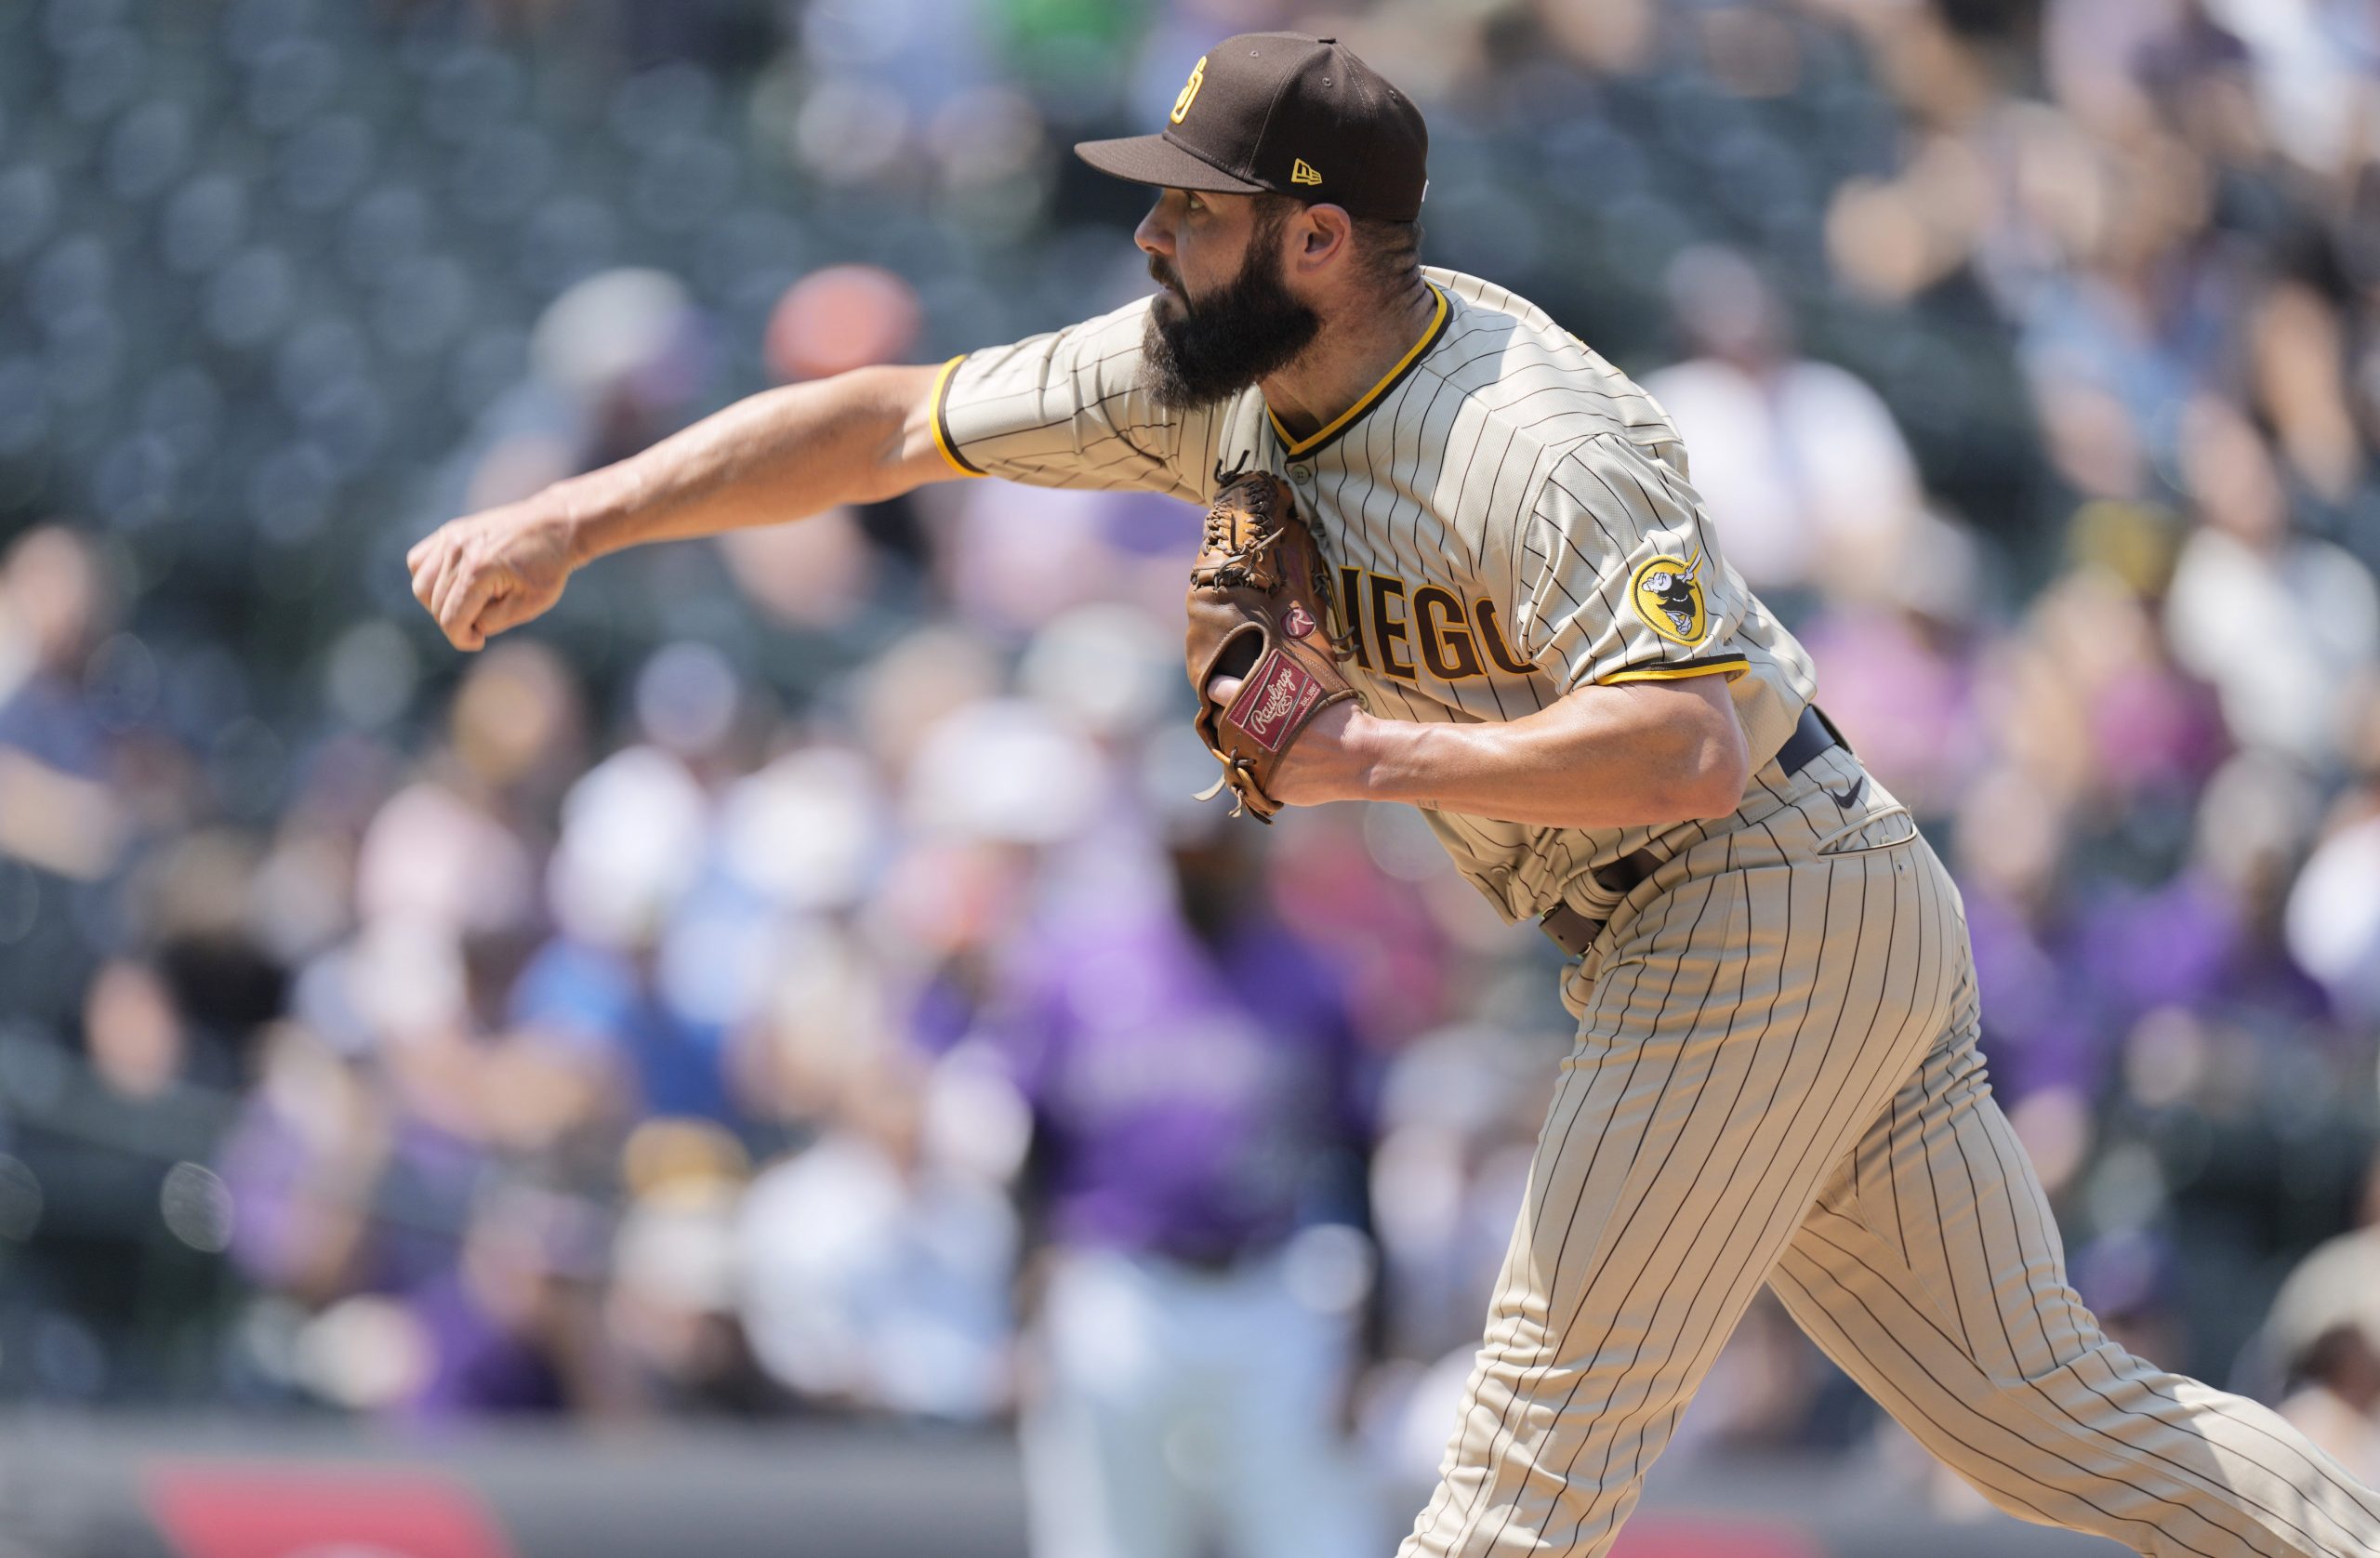 Jake Arrieta was unsurprisingly shelled in his start for the San Diego Padres on Wednesday and social media was blowing up with jokes